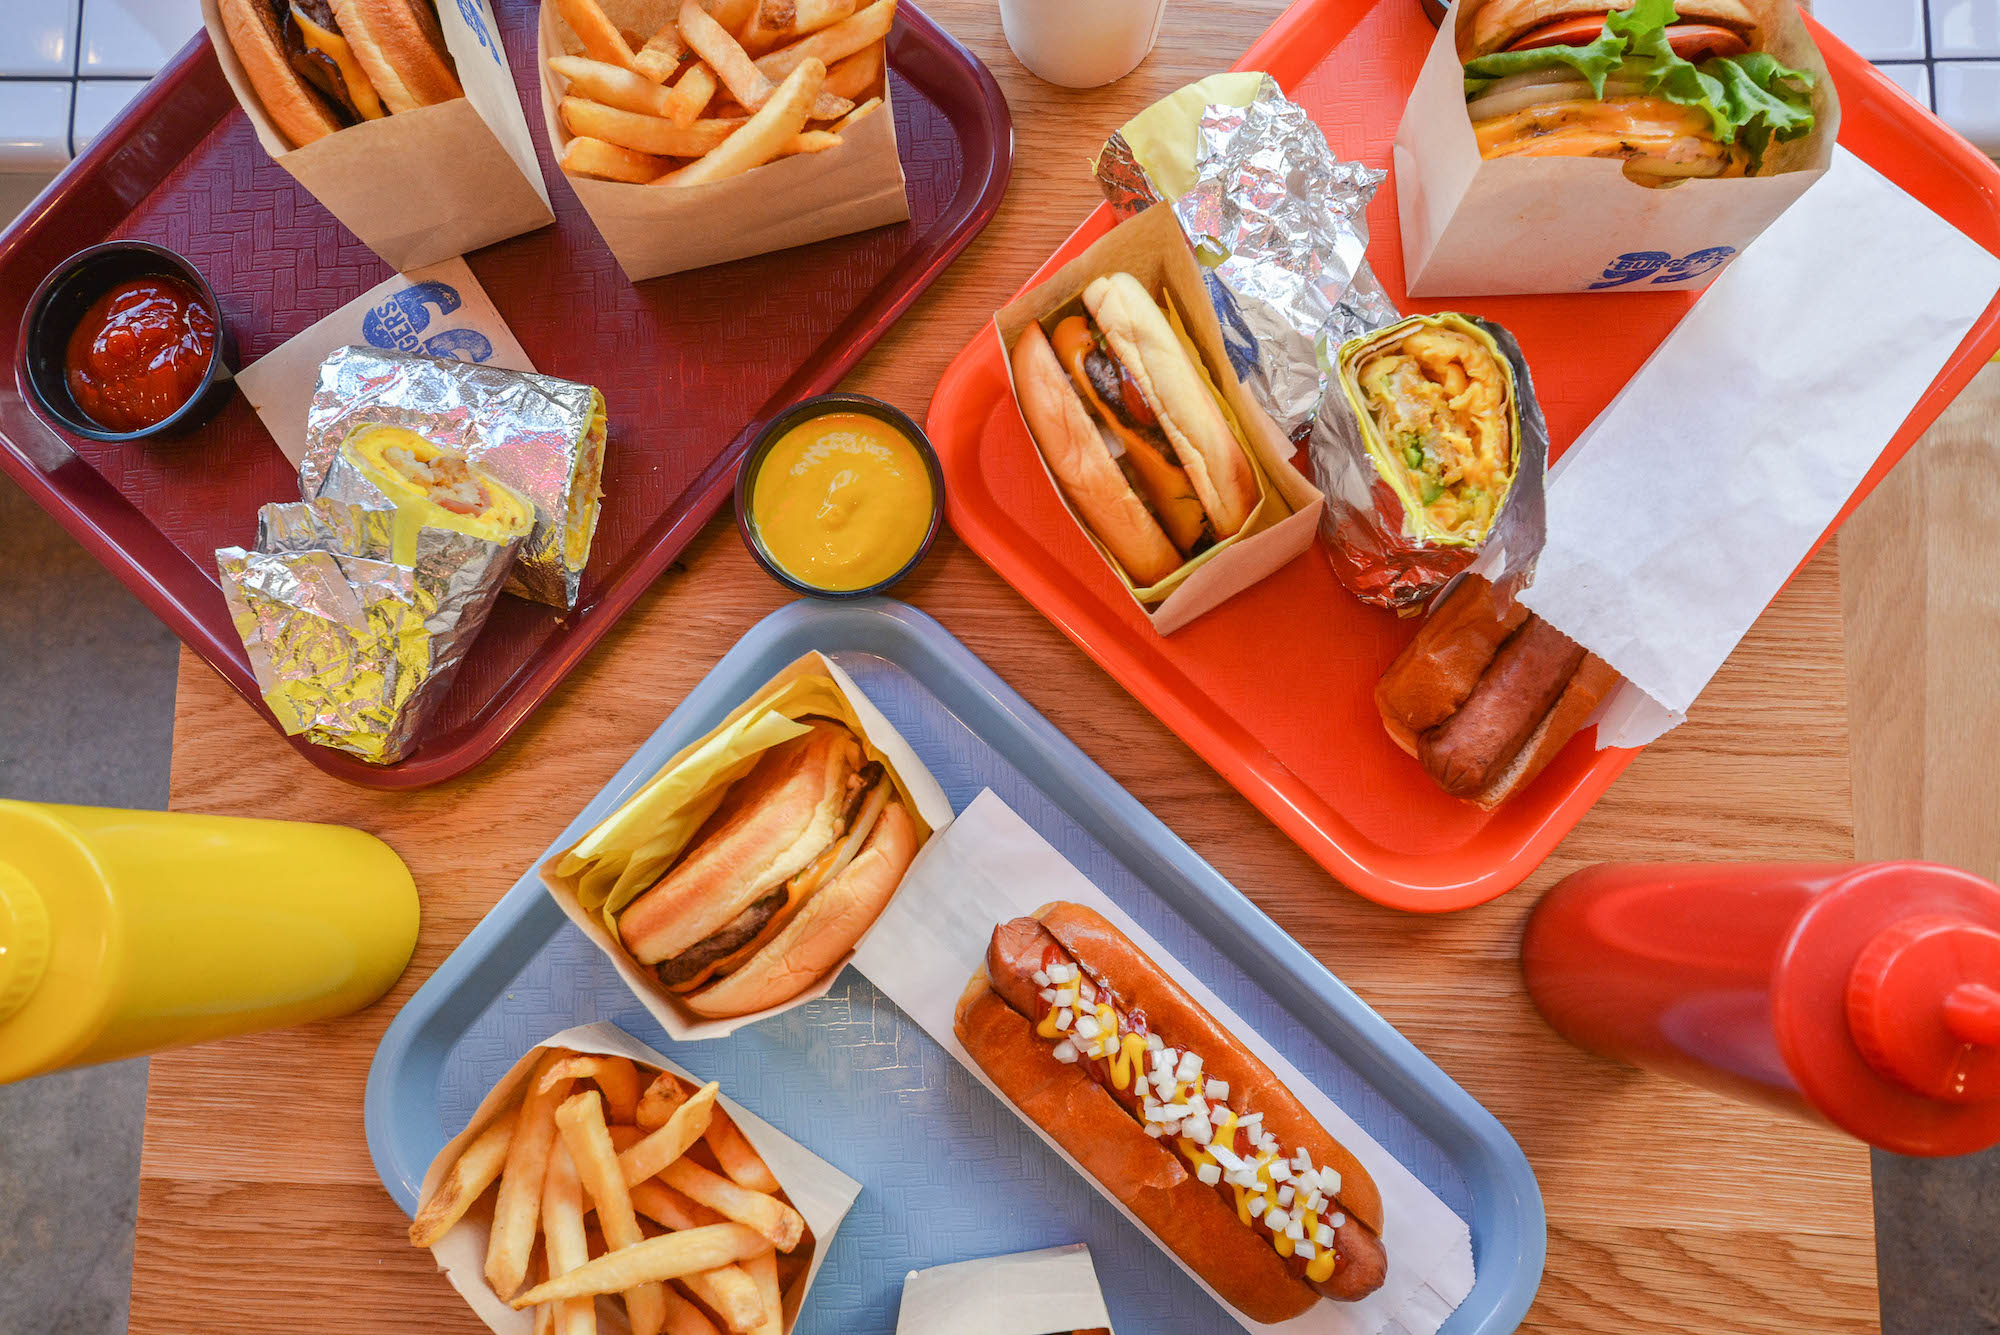 An above shot of three colored trays of burgers and hot dogs and fries.